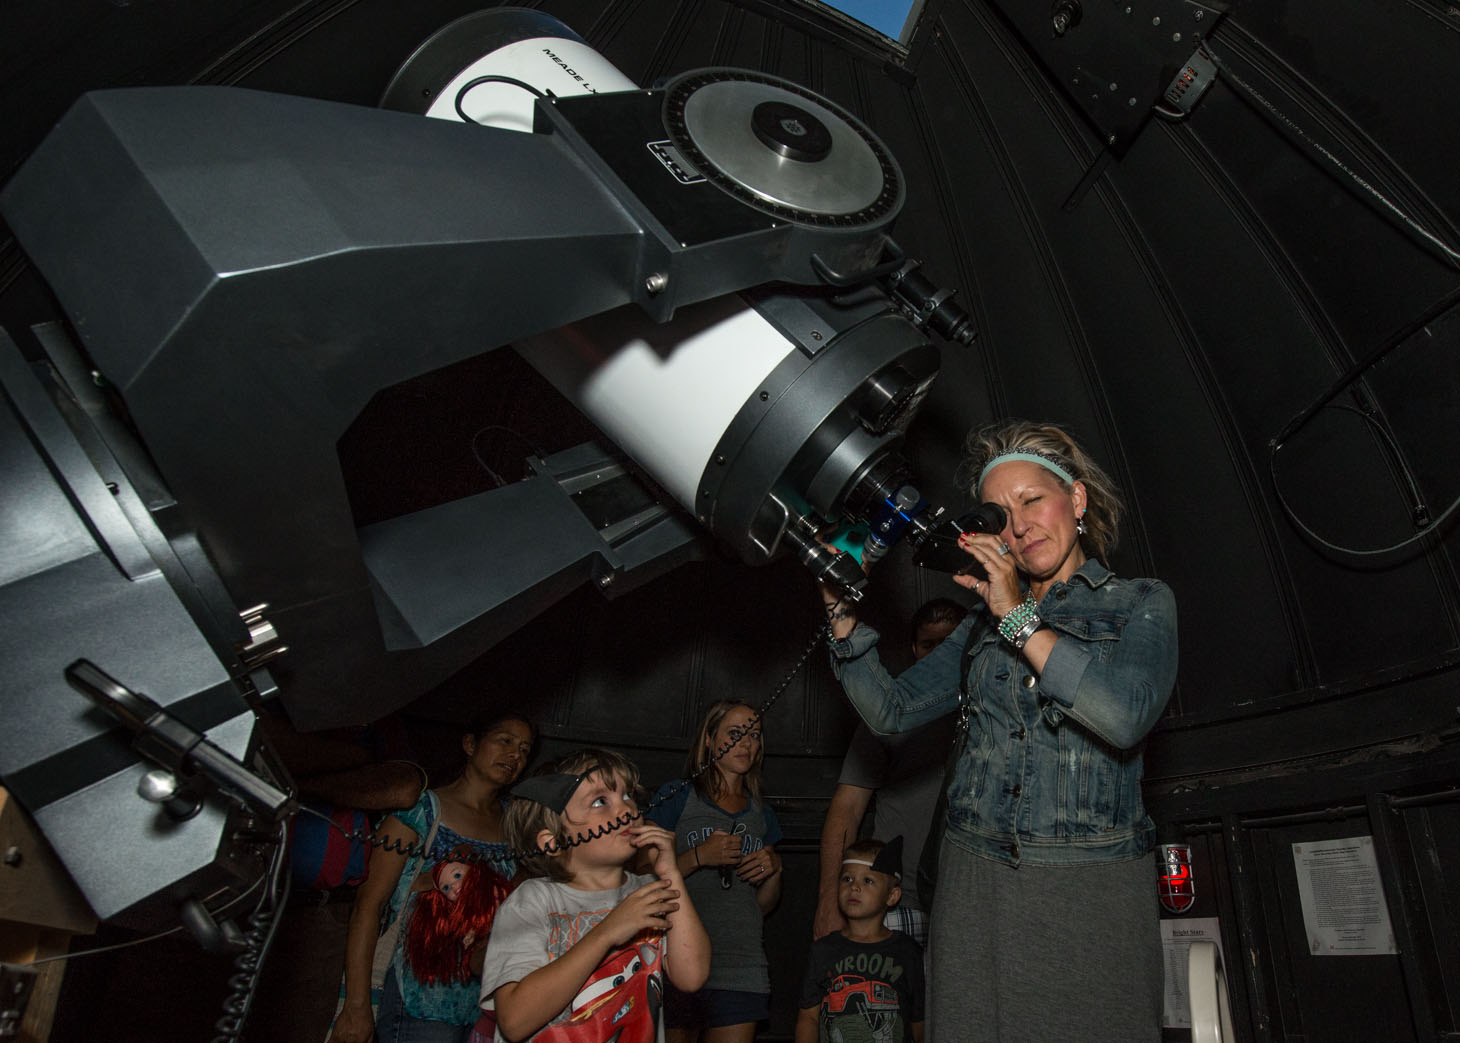 Visitors look through a telescope at the UNL Student Observatory as part of "Archie’s Late Night Party" in 2015.